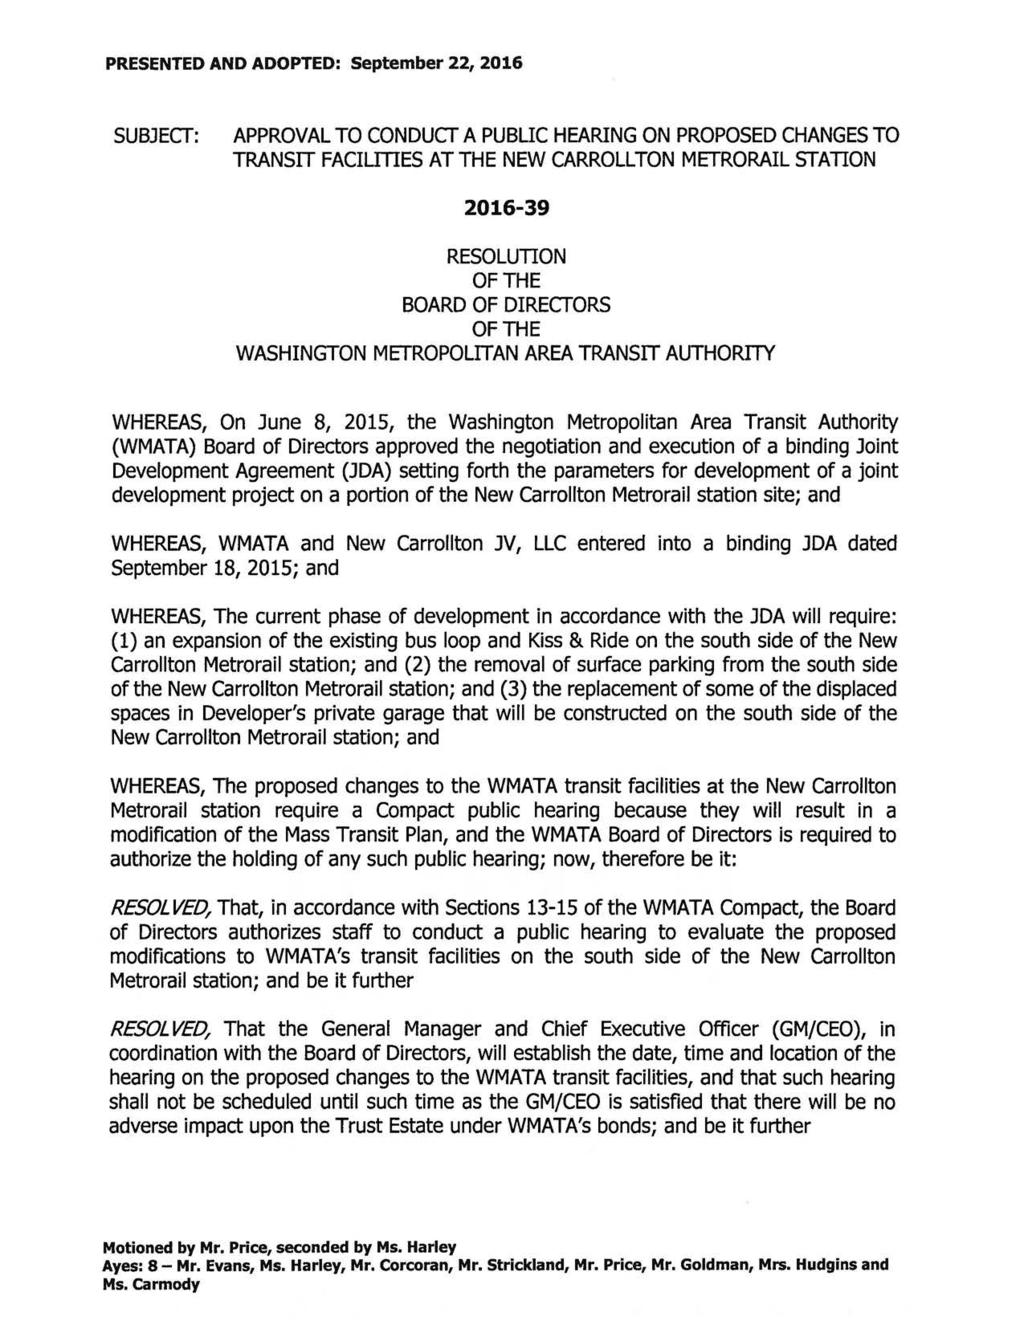 PRESENTED AND ADOPTED: September 22, 2016 SUBJECT: APPROVAL TO CONDUCT A PUBLIC HEARING ON PROPOSED CHANGES TO TRANSIT FACILffiES AT THE NEW CARROLL TON METRORAIL STATION 2016-39 RESOLUTION OF THE